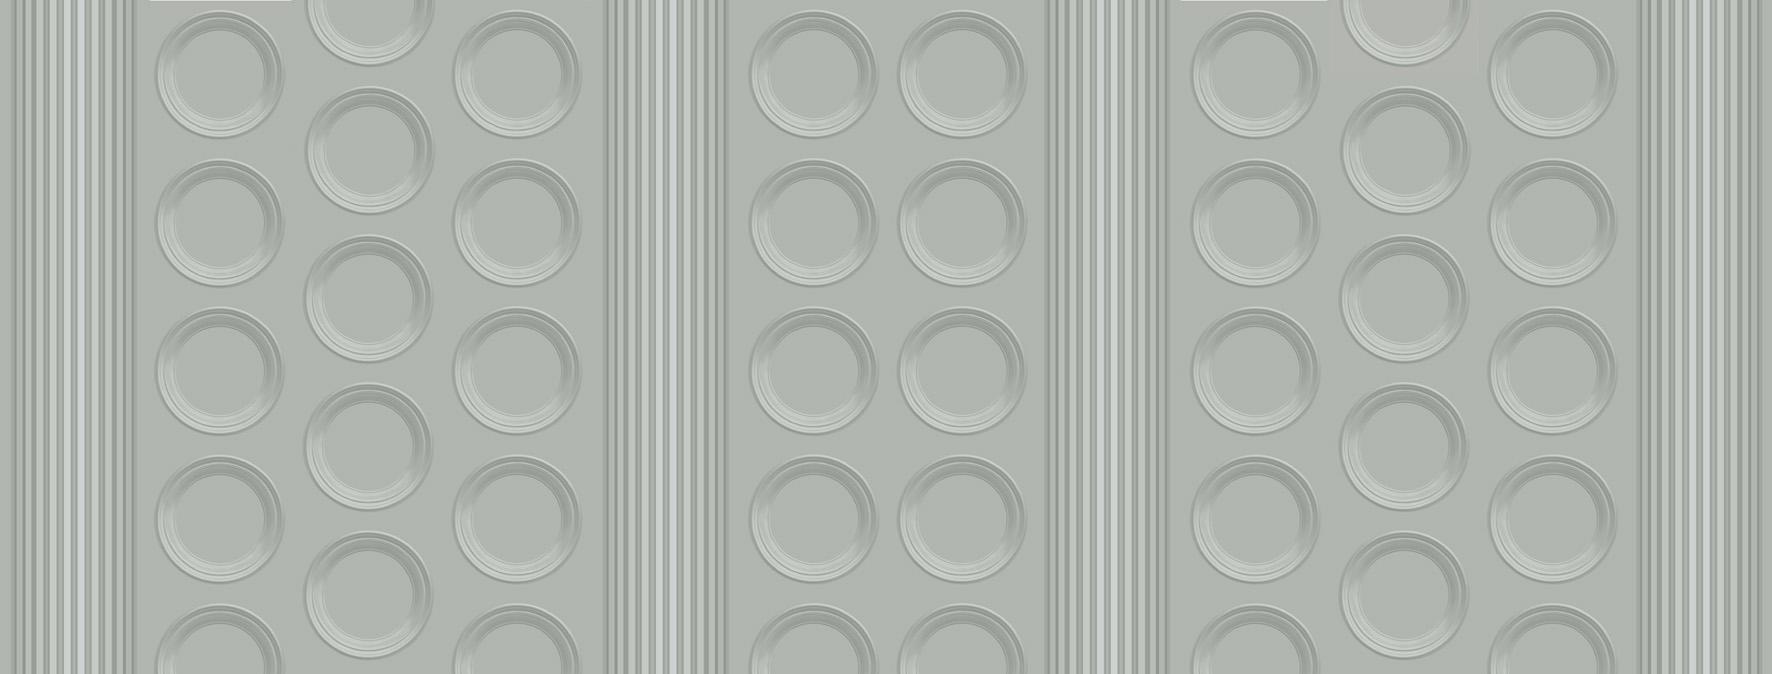 Doctor Who: Wallpaper: Classic TARDIS Roundels @ ForbiddenPlanet ...